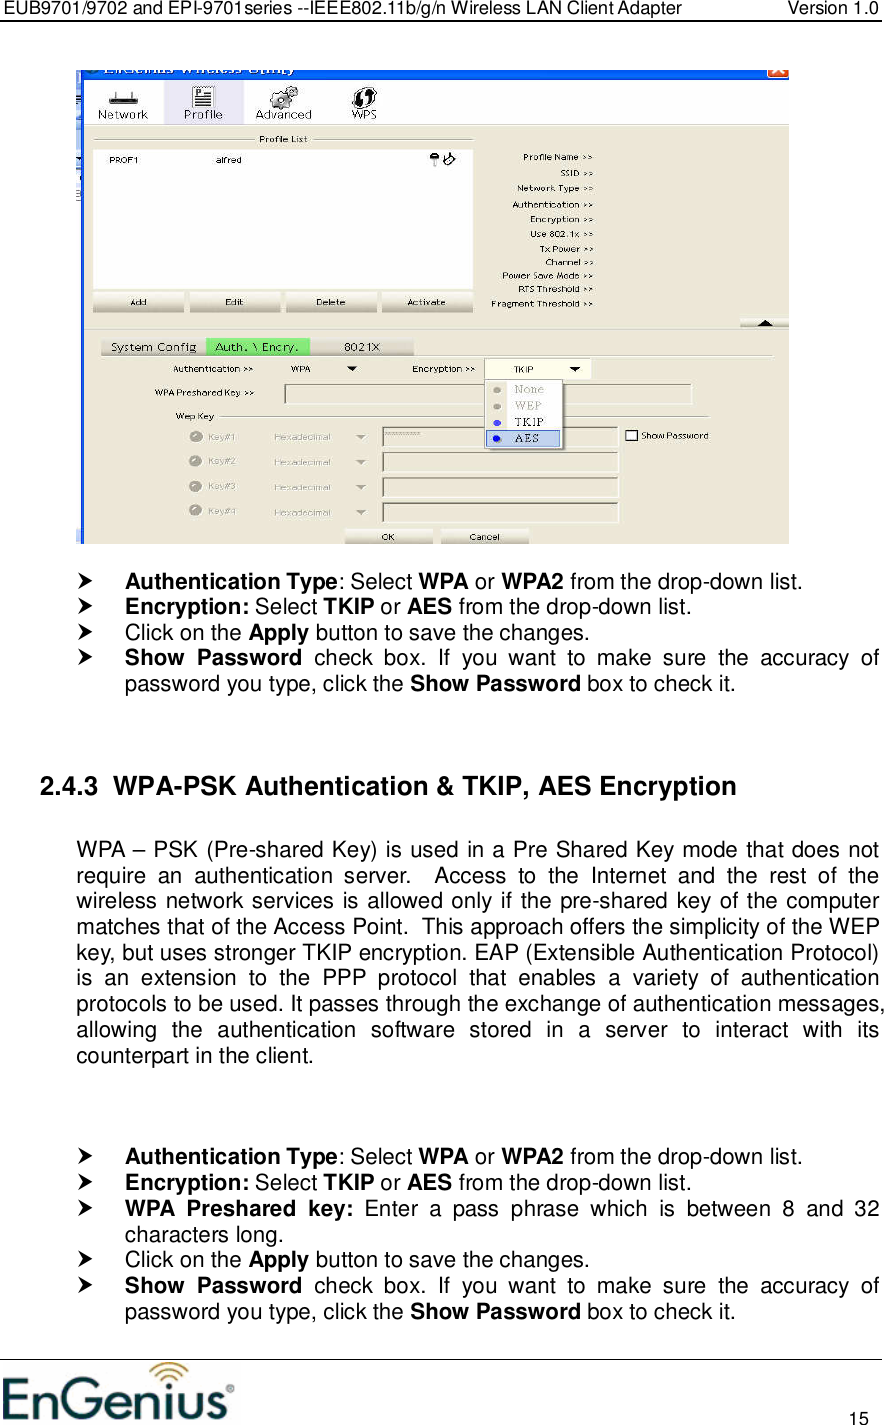 EUB9701/9702 and EPI-9701series --IEEE802.11b/g/n Wireless LAN Client Adapter  Version 1.0                                                                                                                          15     Authentication Type: Select WPA or WPA2 from the drop-down list.   Encryption: Select TKIP or AES from the drop-down list.    Click on the Apply button to save the changes.   Show  Password  check  box.  If  you  want  to  make  sure  the  accuracy  of password you type, click the Show Password box to check it.   2.4.3  WPA-PSK Authentication &amp; TKIP, AES Encryption  WPA – PSK (Pre-shared Key) is used in a Pre Shared Key mode that does not require  an  authentication  server.    Access  to  the  Internet  and  the  rest  of  the wireless network services is allowed only if the pre-shared key of the computer matches that of the Access Point.  This approach offers the simplicity of the WEP key, but uses stronger TKIP encryption. EAP (Extensible Authentication Protocol) is  an  extension  to  the  PPP  protocol  that  enables  a  variety  of  authentication protocols to be used. It passes through the exchange of authentication messages, allowing  the  authentication  software  stored  in  a  server  to  interact  with  its counterpart in the client.     Authentication Type: Select WPA or WPA2 from the drop-down list.   Encryption: Select TKIP or AES from the drop-down list.   WPA  Preshared  key:  Enter  a  pass  phrase  which  is  between  8  and  32 characters long.    Click on the Apply button to save the changes.   Show  Password  check  box.  If  you  want  to  make  sure  the  accuracy  of password you type, click the Show Password box to check it. 